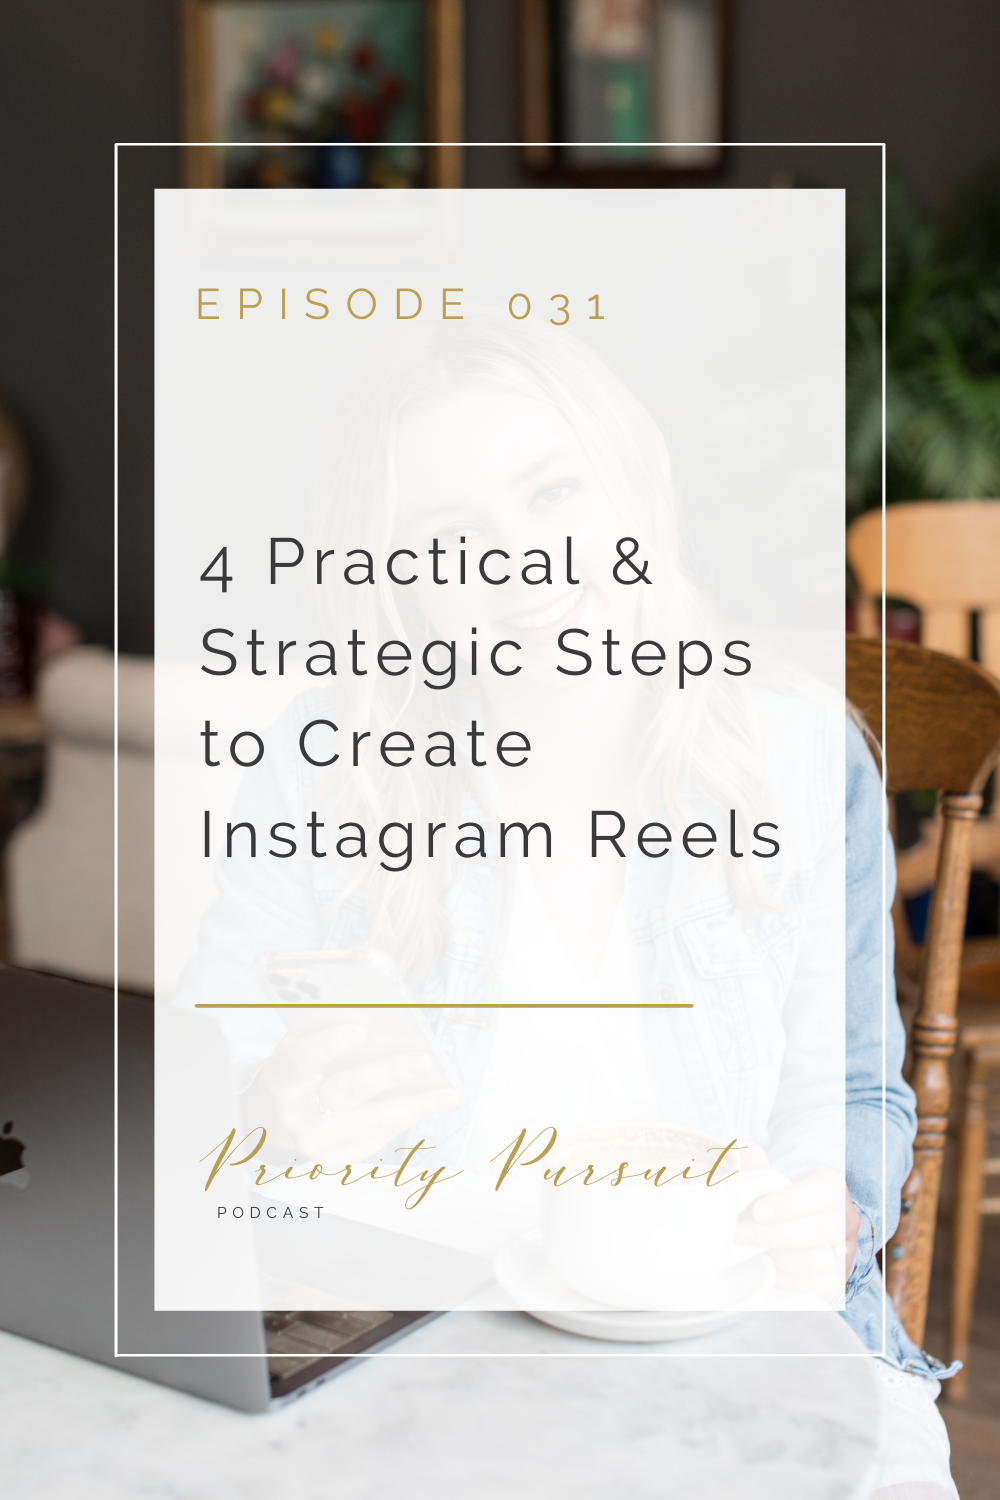 Victoria Rayburn explains four practical, strategic steps to create Instagram reels in this episode of the Priority Pursuit Podcast. 